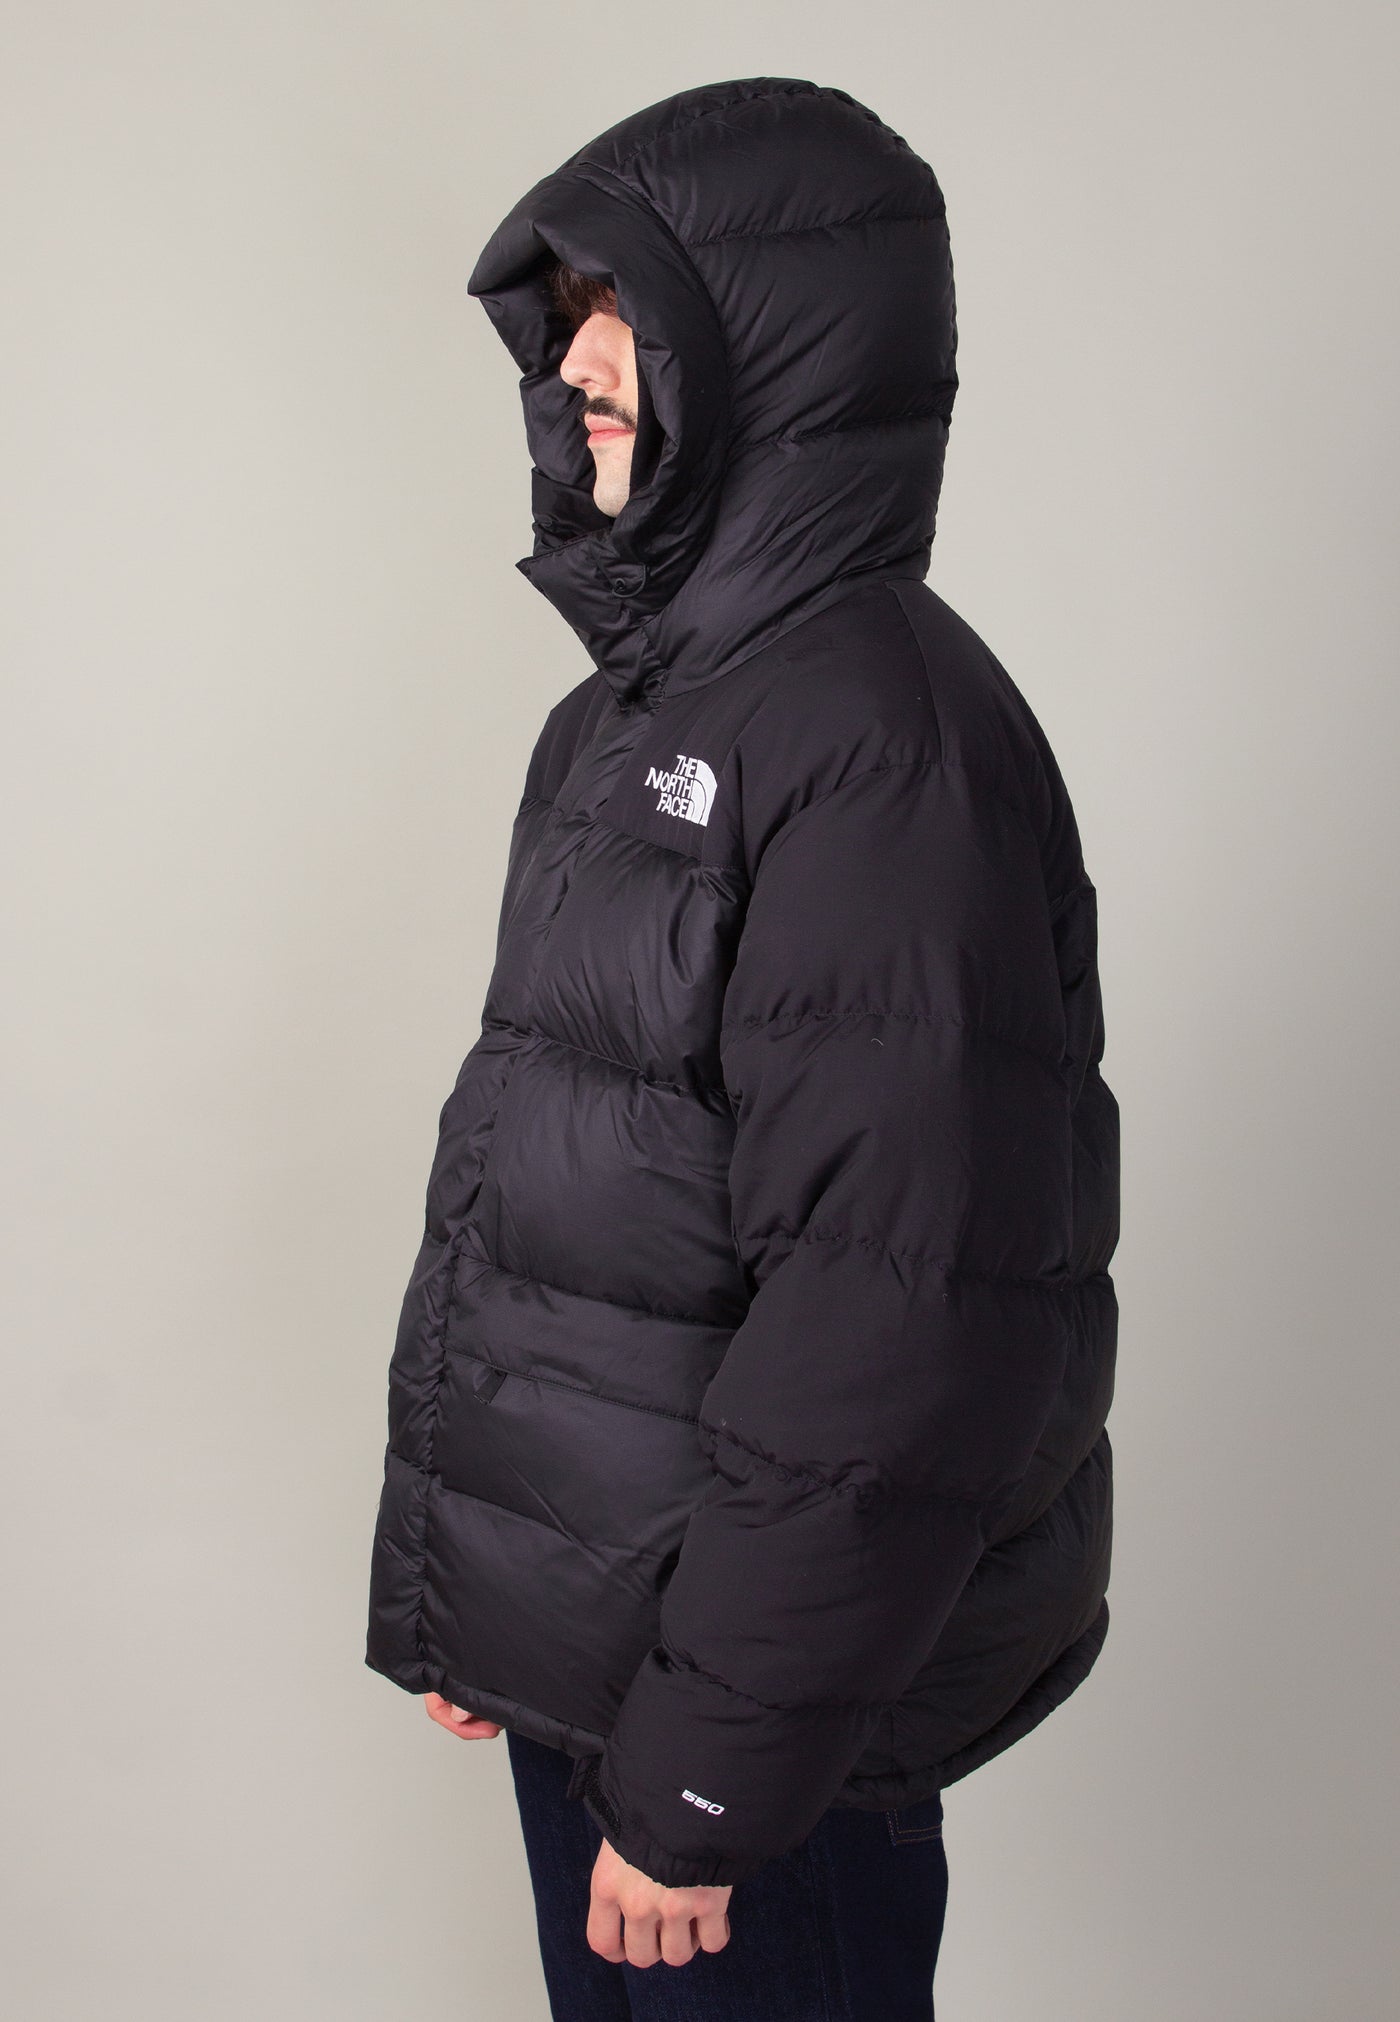 The North Face Men's Hmlyn Down Parka